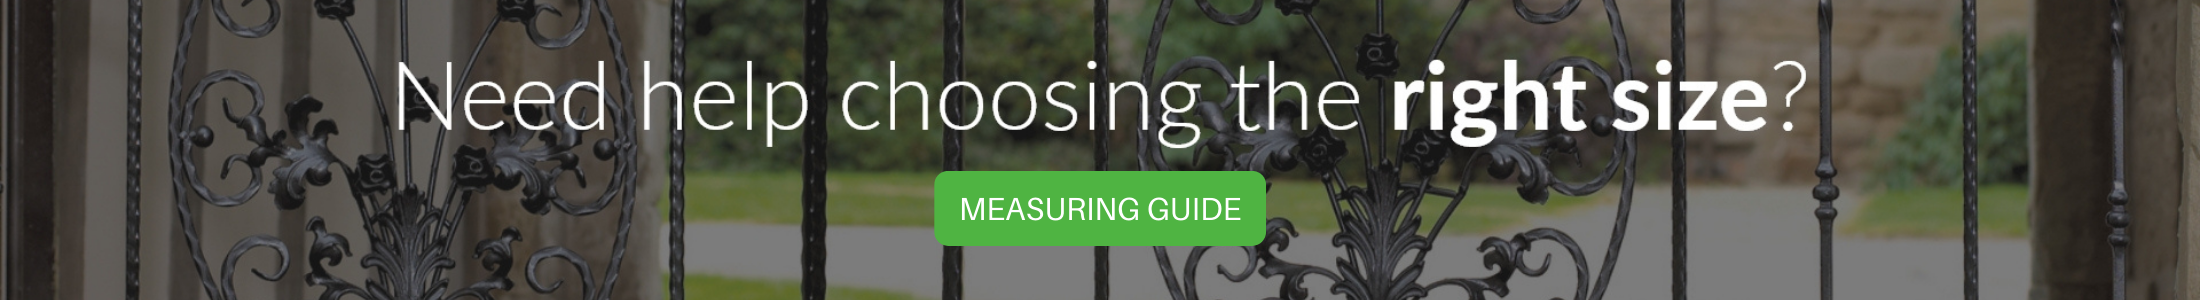 Measuring Guide - Click here for help and advice choosing the correct size fencing